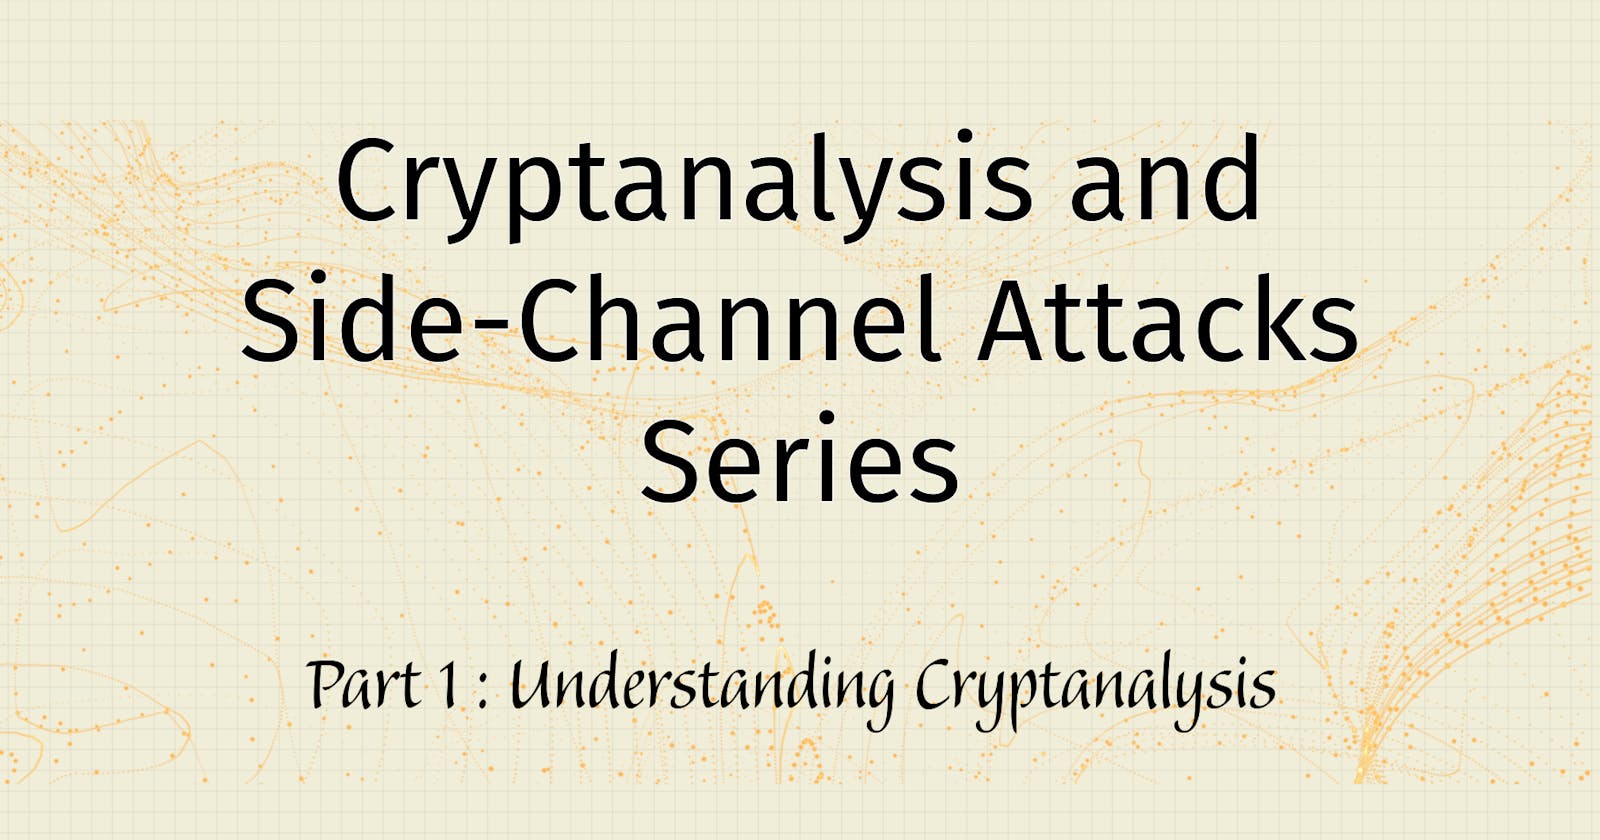 Understanding Cryptanalysis and Side-Channel Attacks